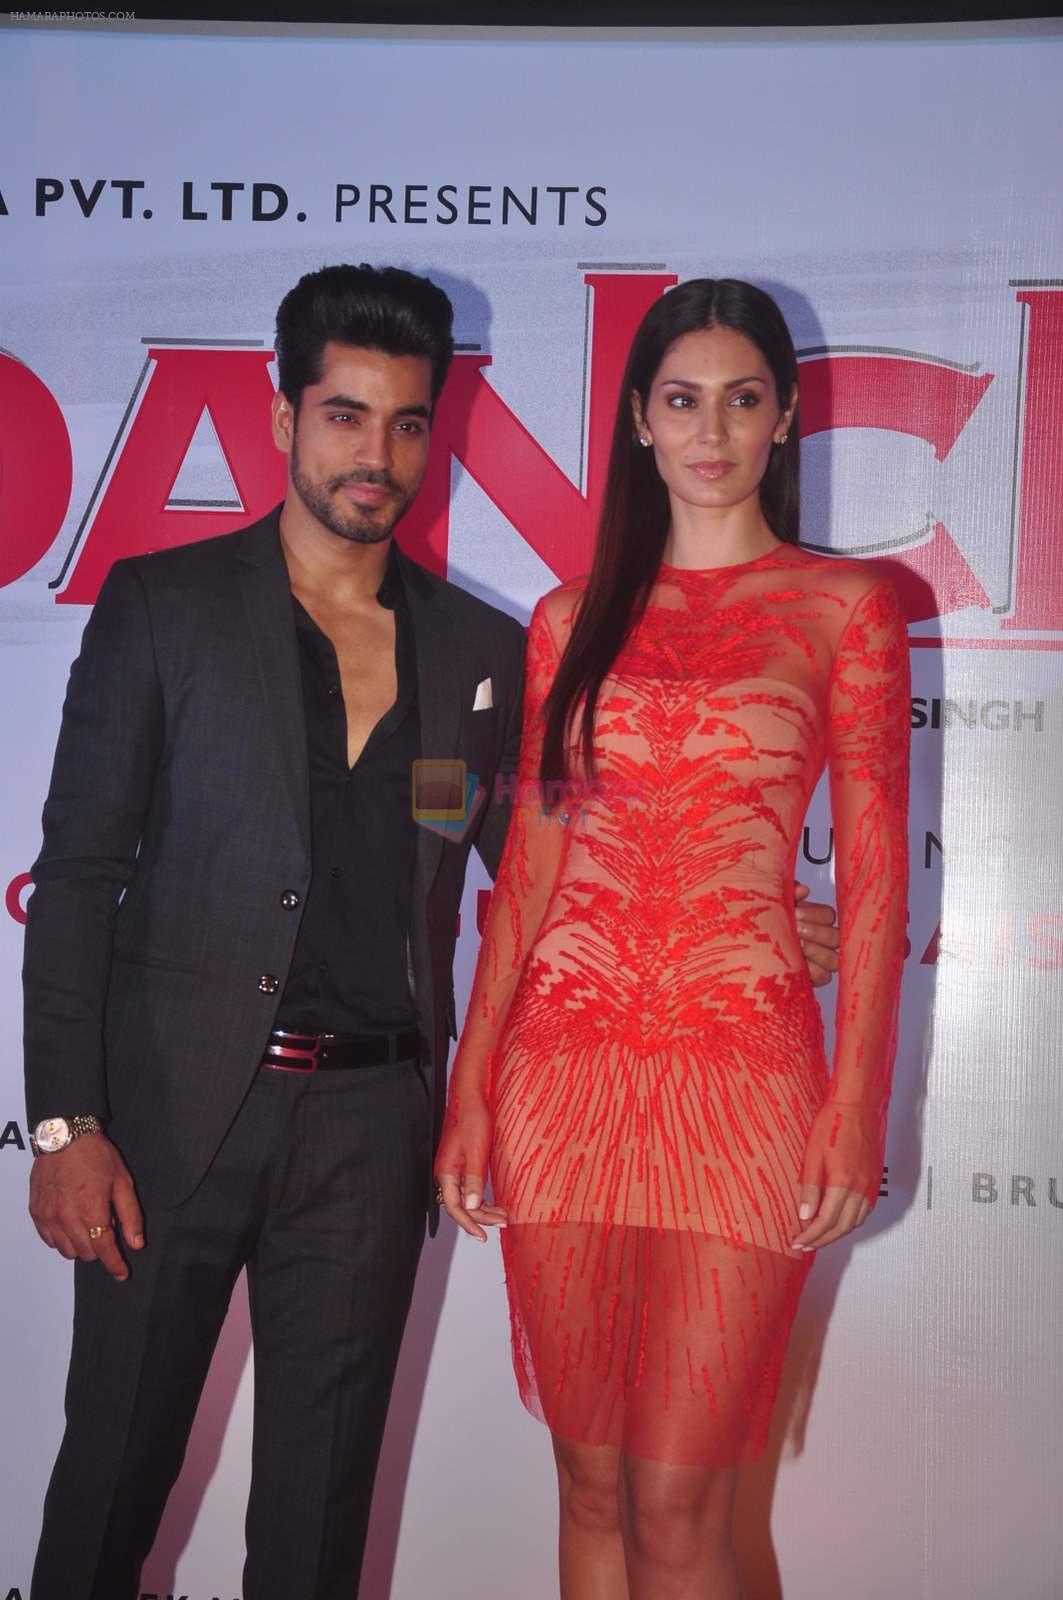 Gautam Gulati, Bruna Abdullah at the launch of R-Vision's movie Udanchhoo directed by Vipin Parashar in Mumbai on 31st March 2015